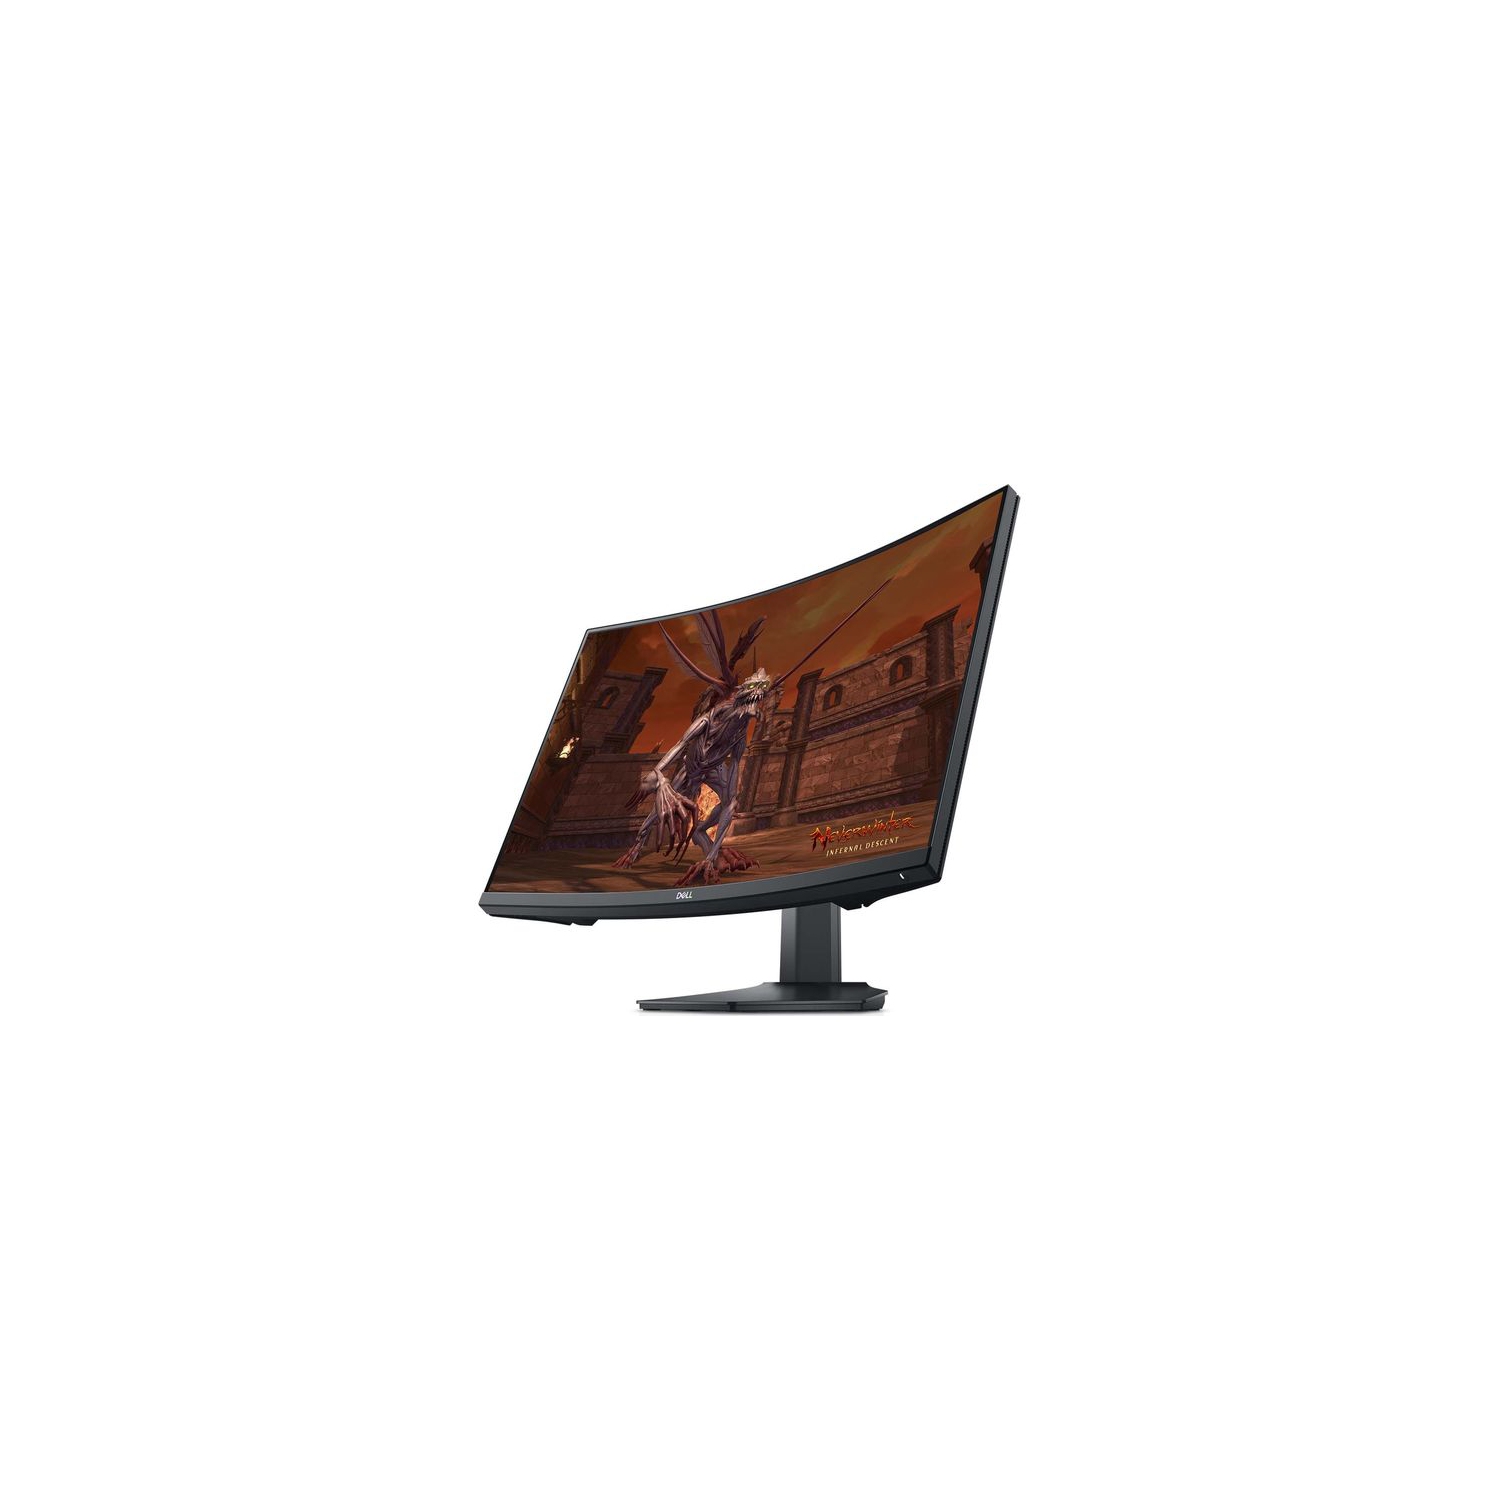 Refurbished (Excellent) - DELL S2721HGF 27" Curved Screen (Gaming) FreeSync/G-Sync, FHD 1920x1080, 144Hz,2X HDMI, DP, Certified Refurbished